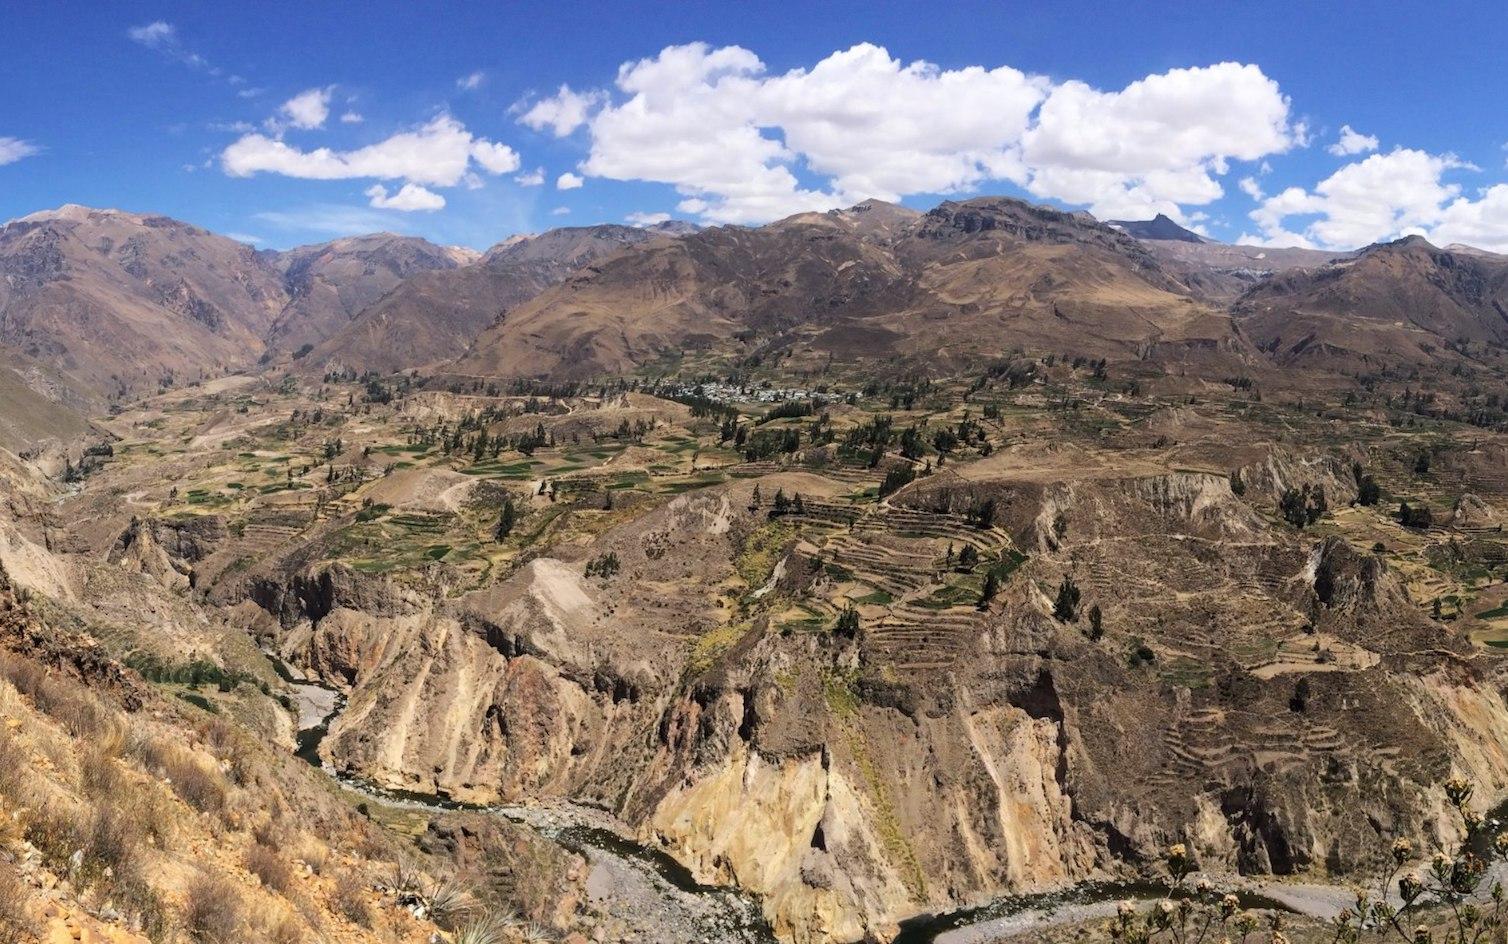 The Definitive Guide To Conquering Peru's Colca Canyon